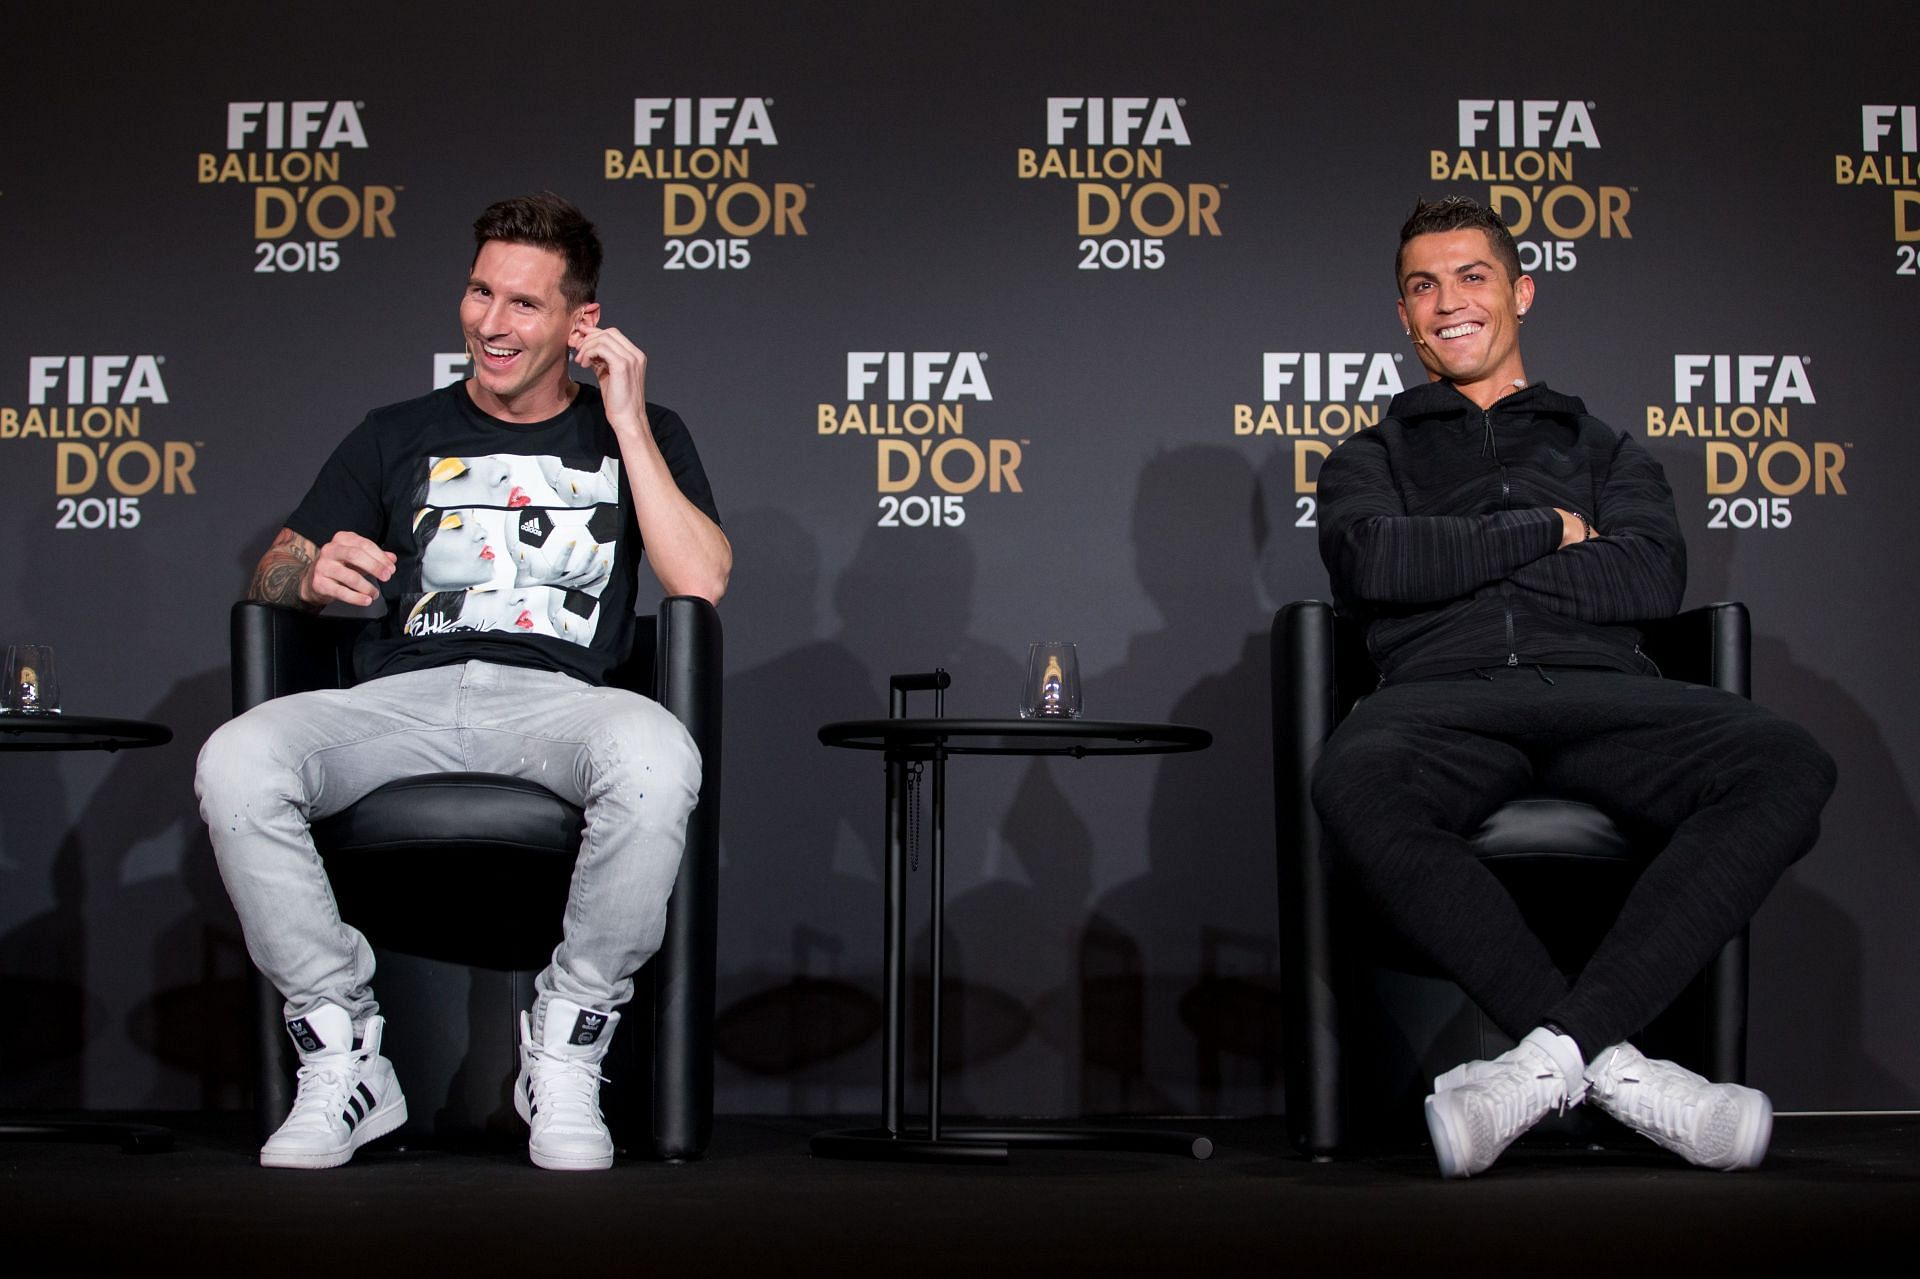 Messi and Ronaldo have dominated world football like never before